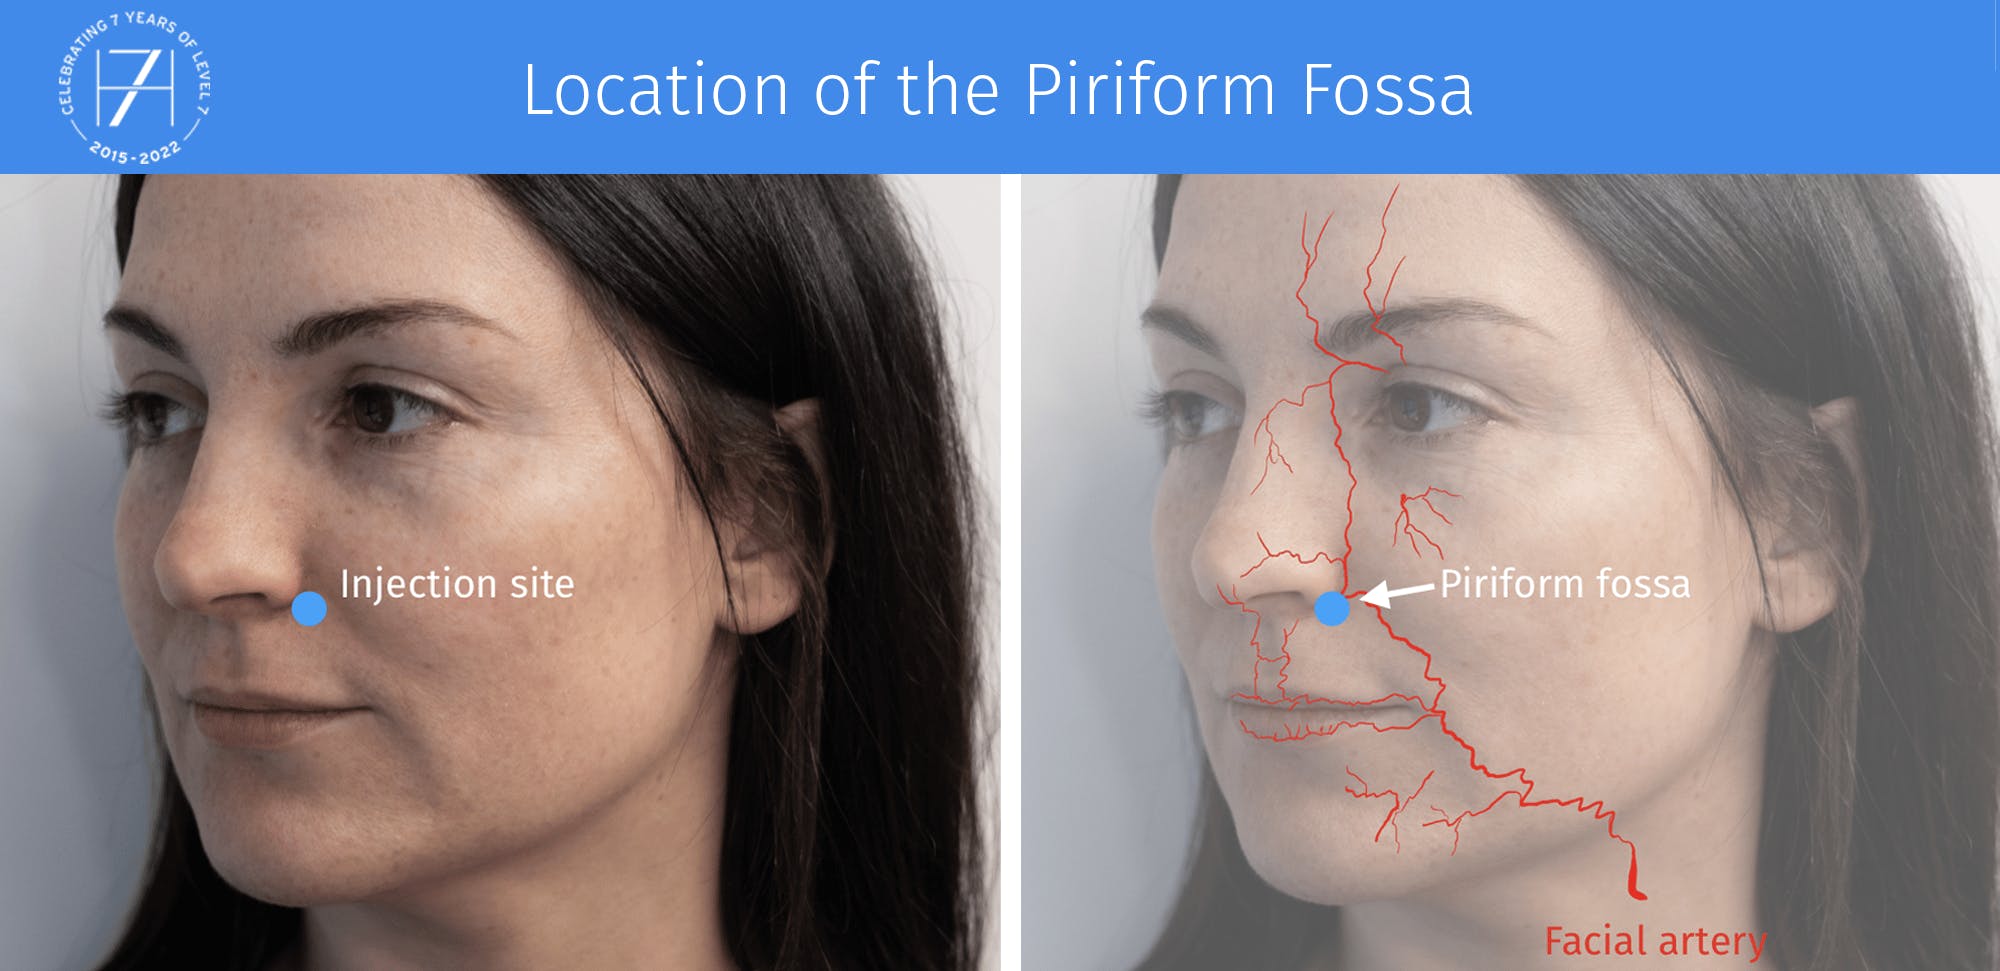 Where is the piriform fossa located